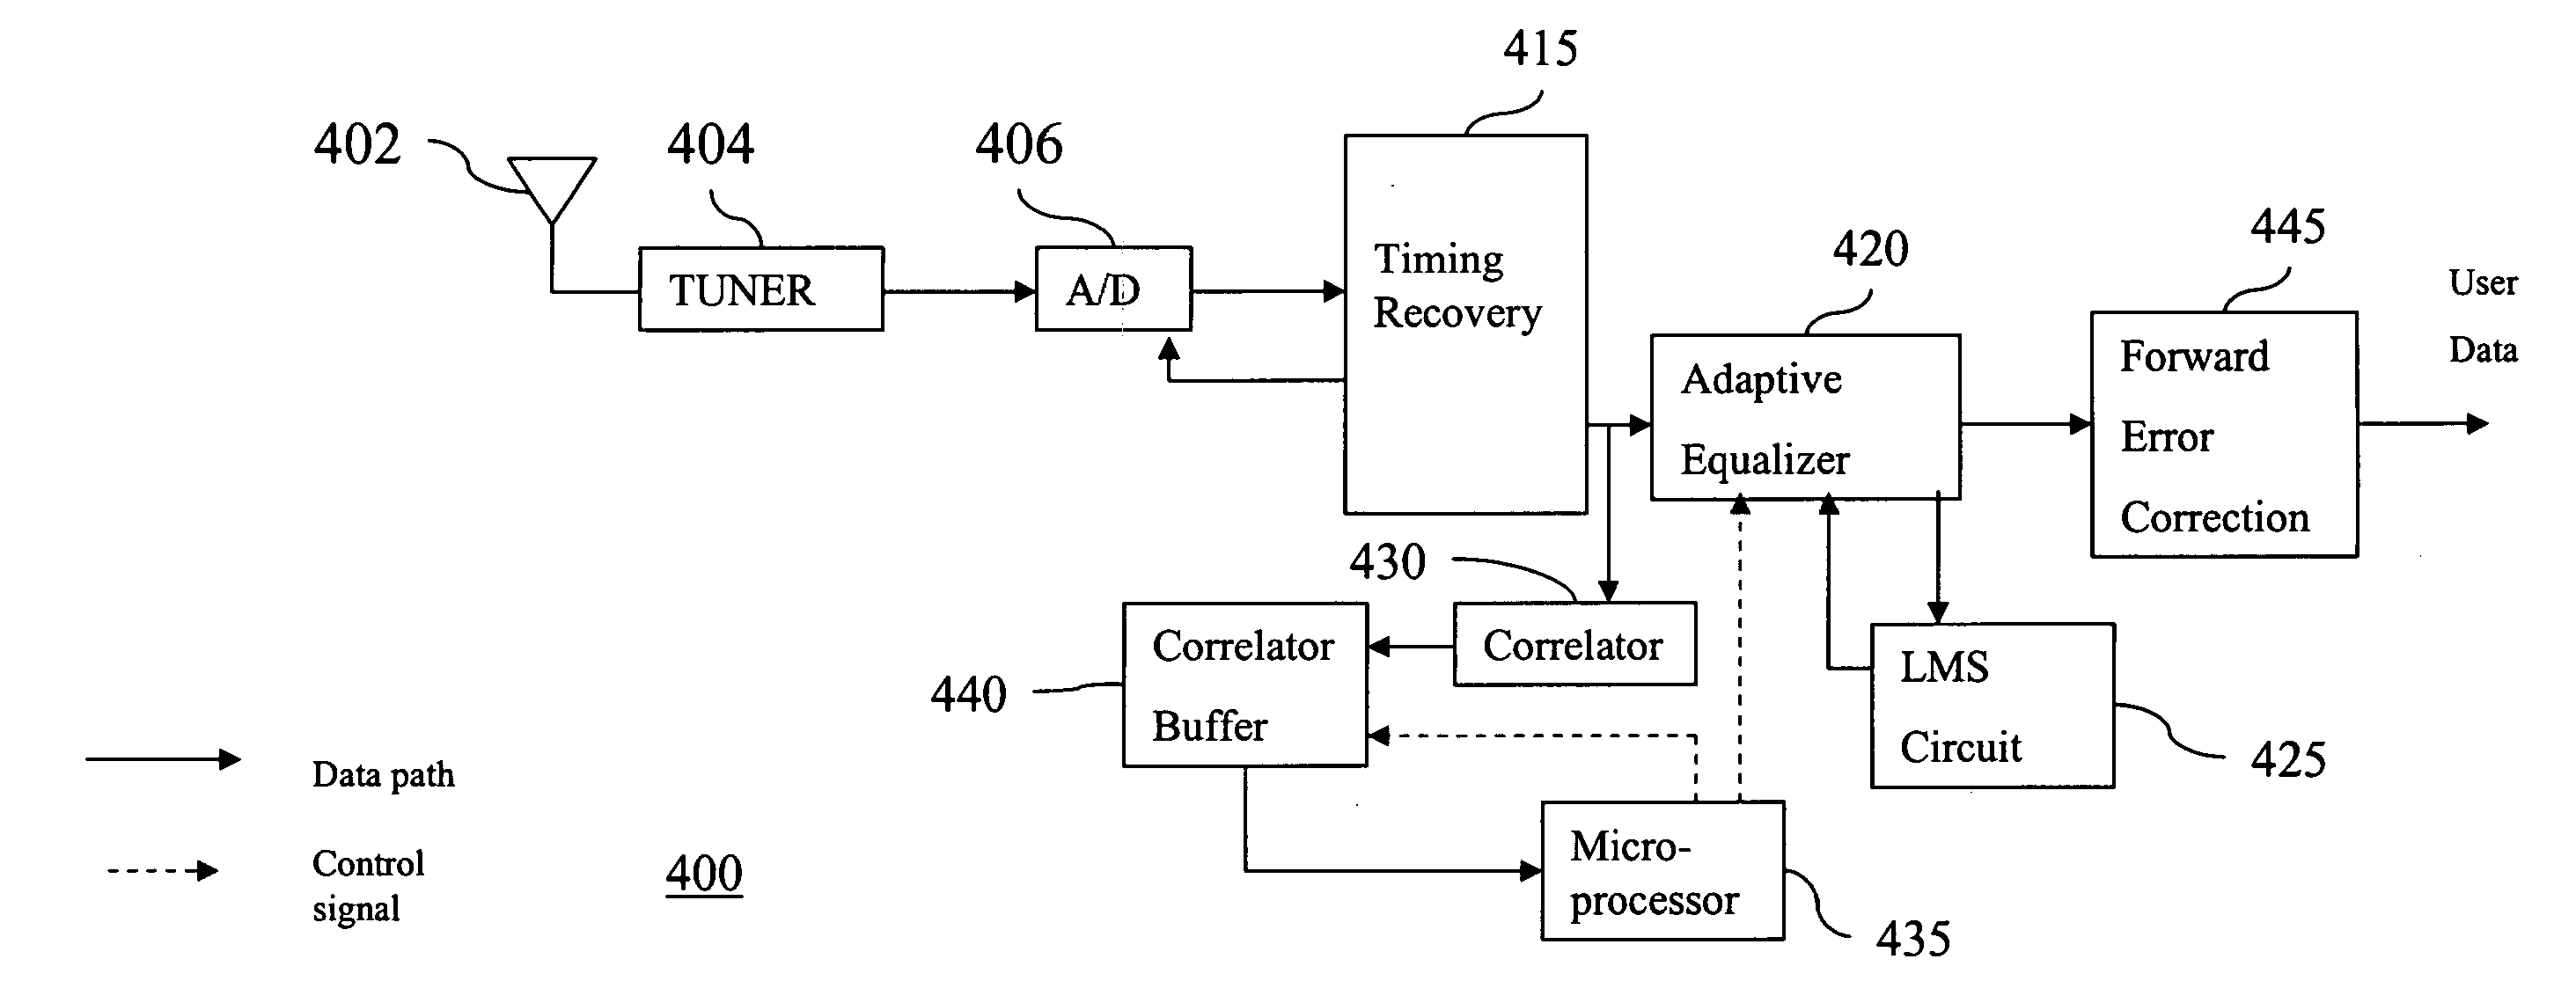 Method and apparatus for equalizing strong pre-echoes in a multi-path communication channel